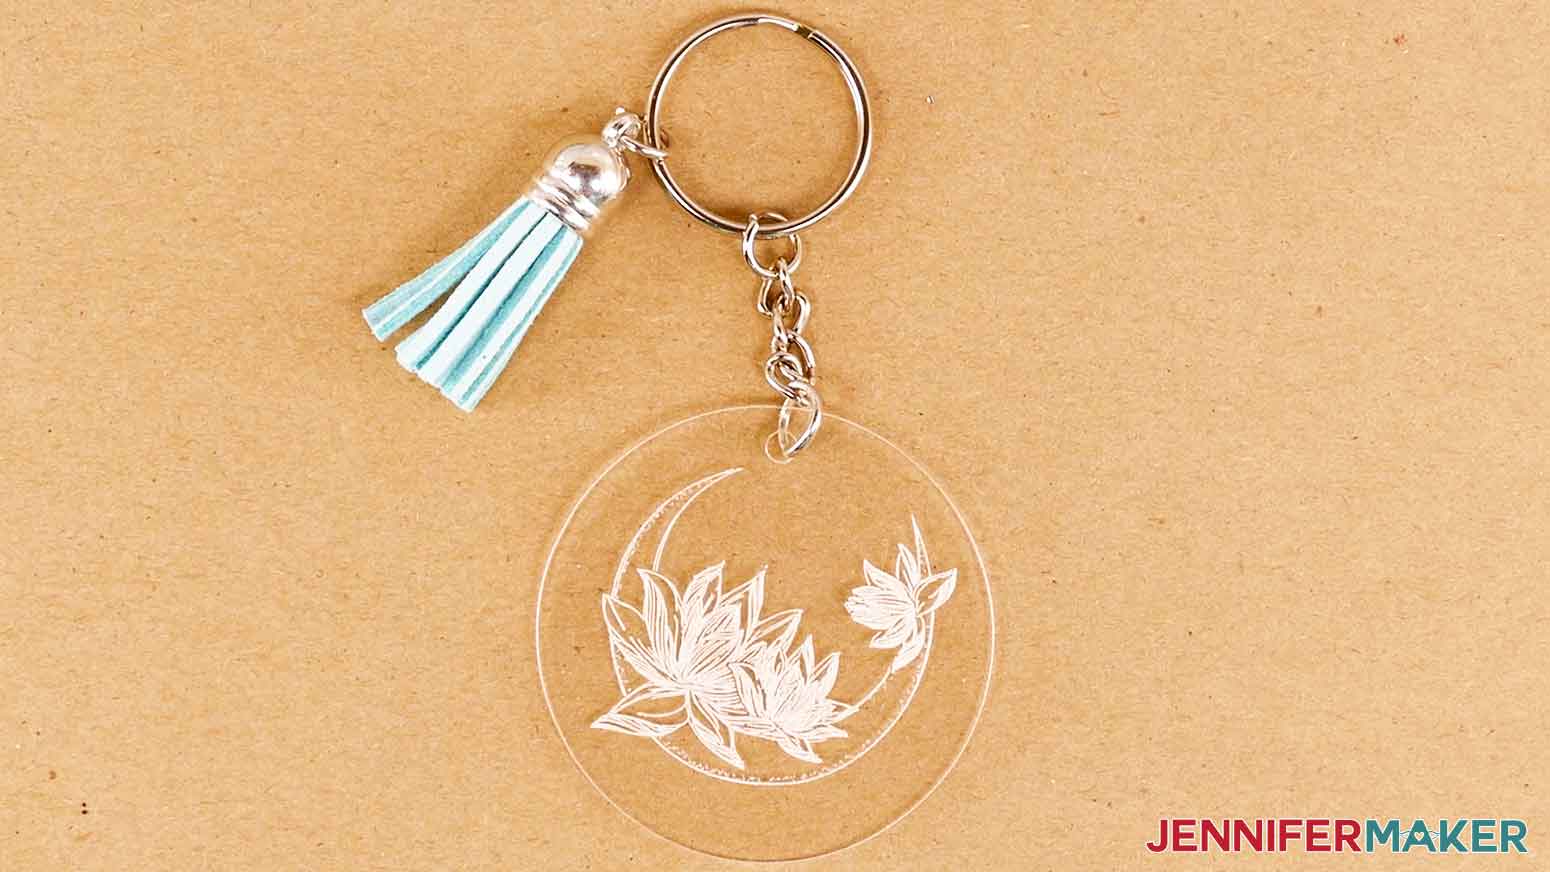 A picture of the final engraved acrylic keychain with a ring and tassel attached.